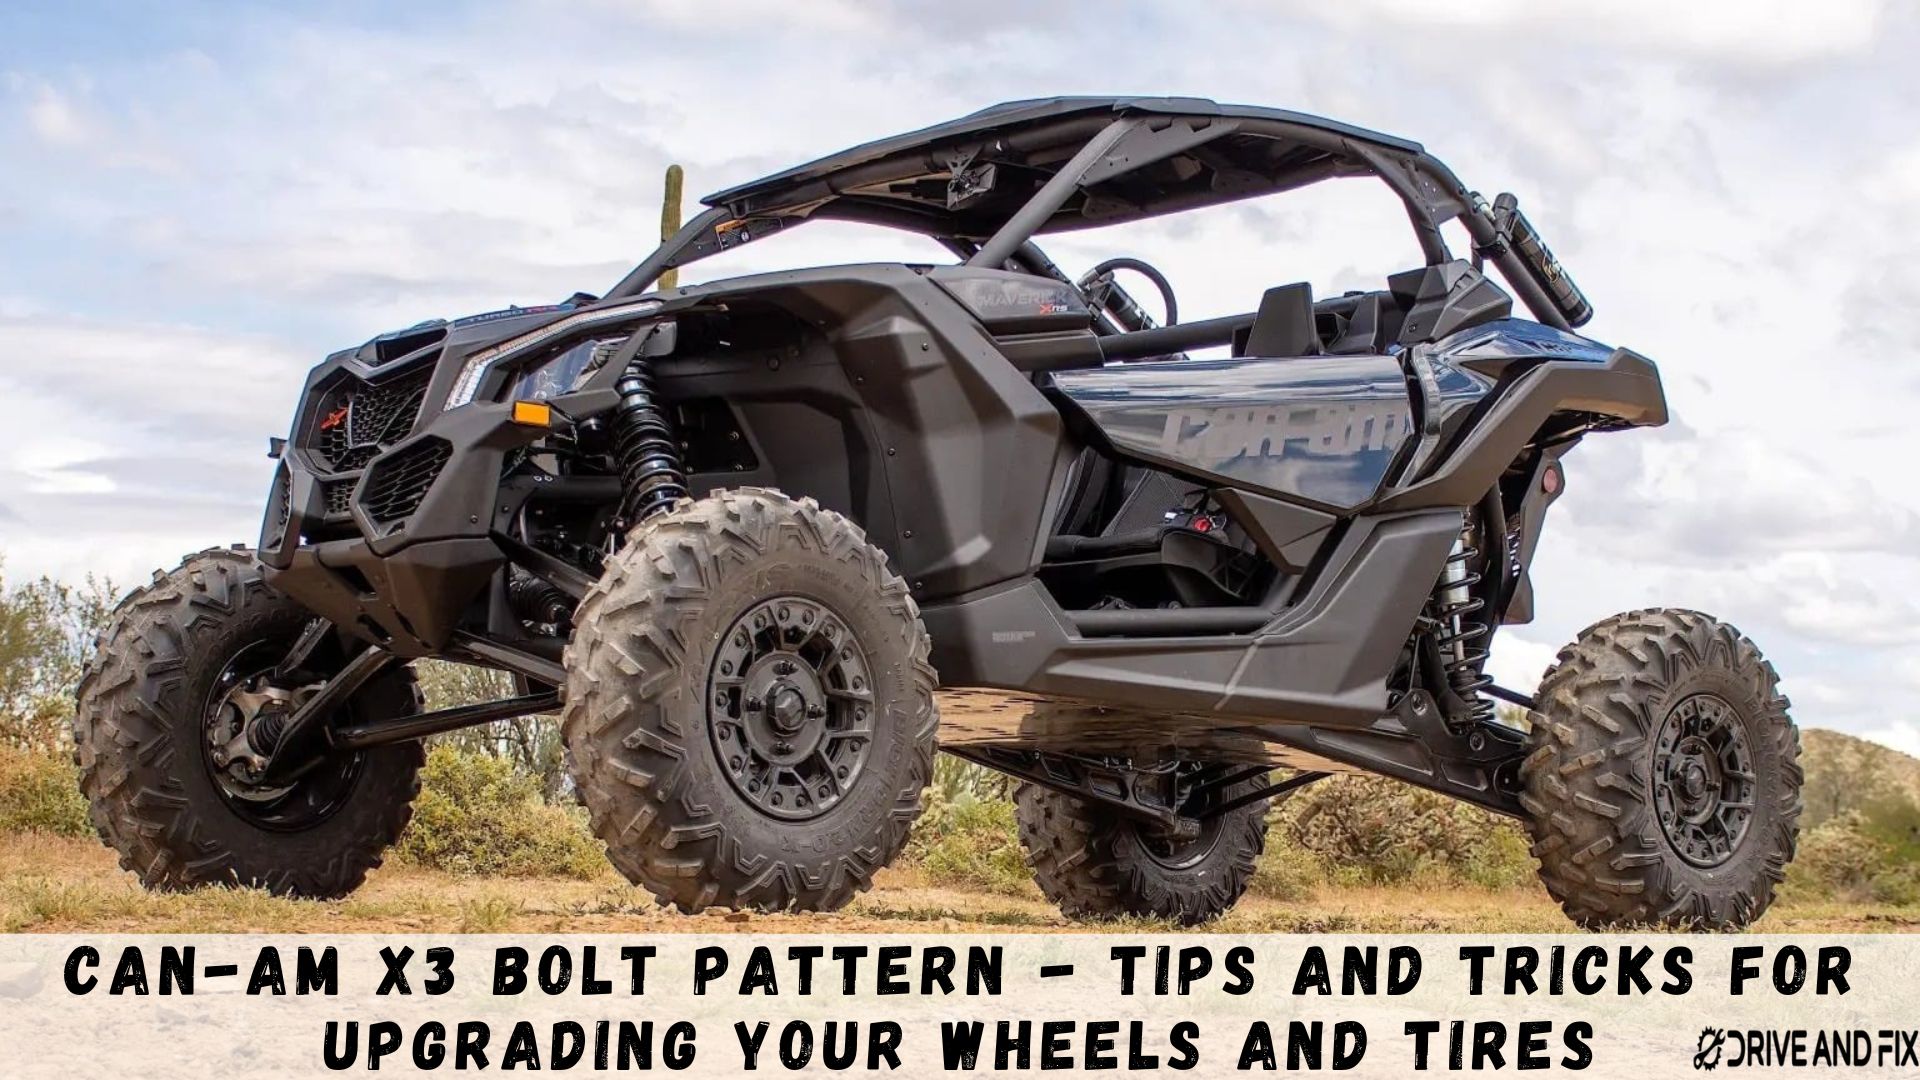 Can-Am X3 Bolt Pattern - Tips And Tricks For Upgrading Your Wheels And Tires